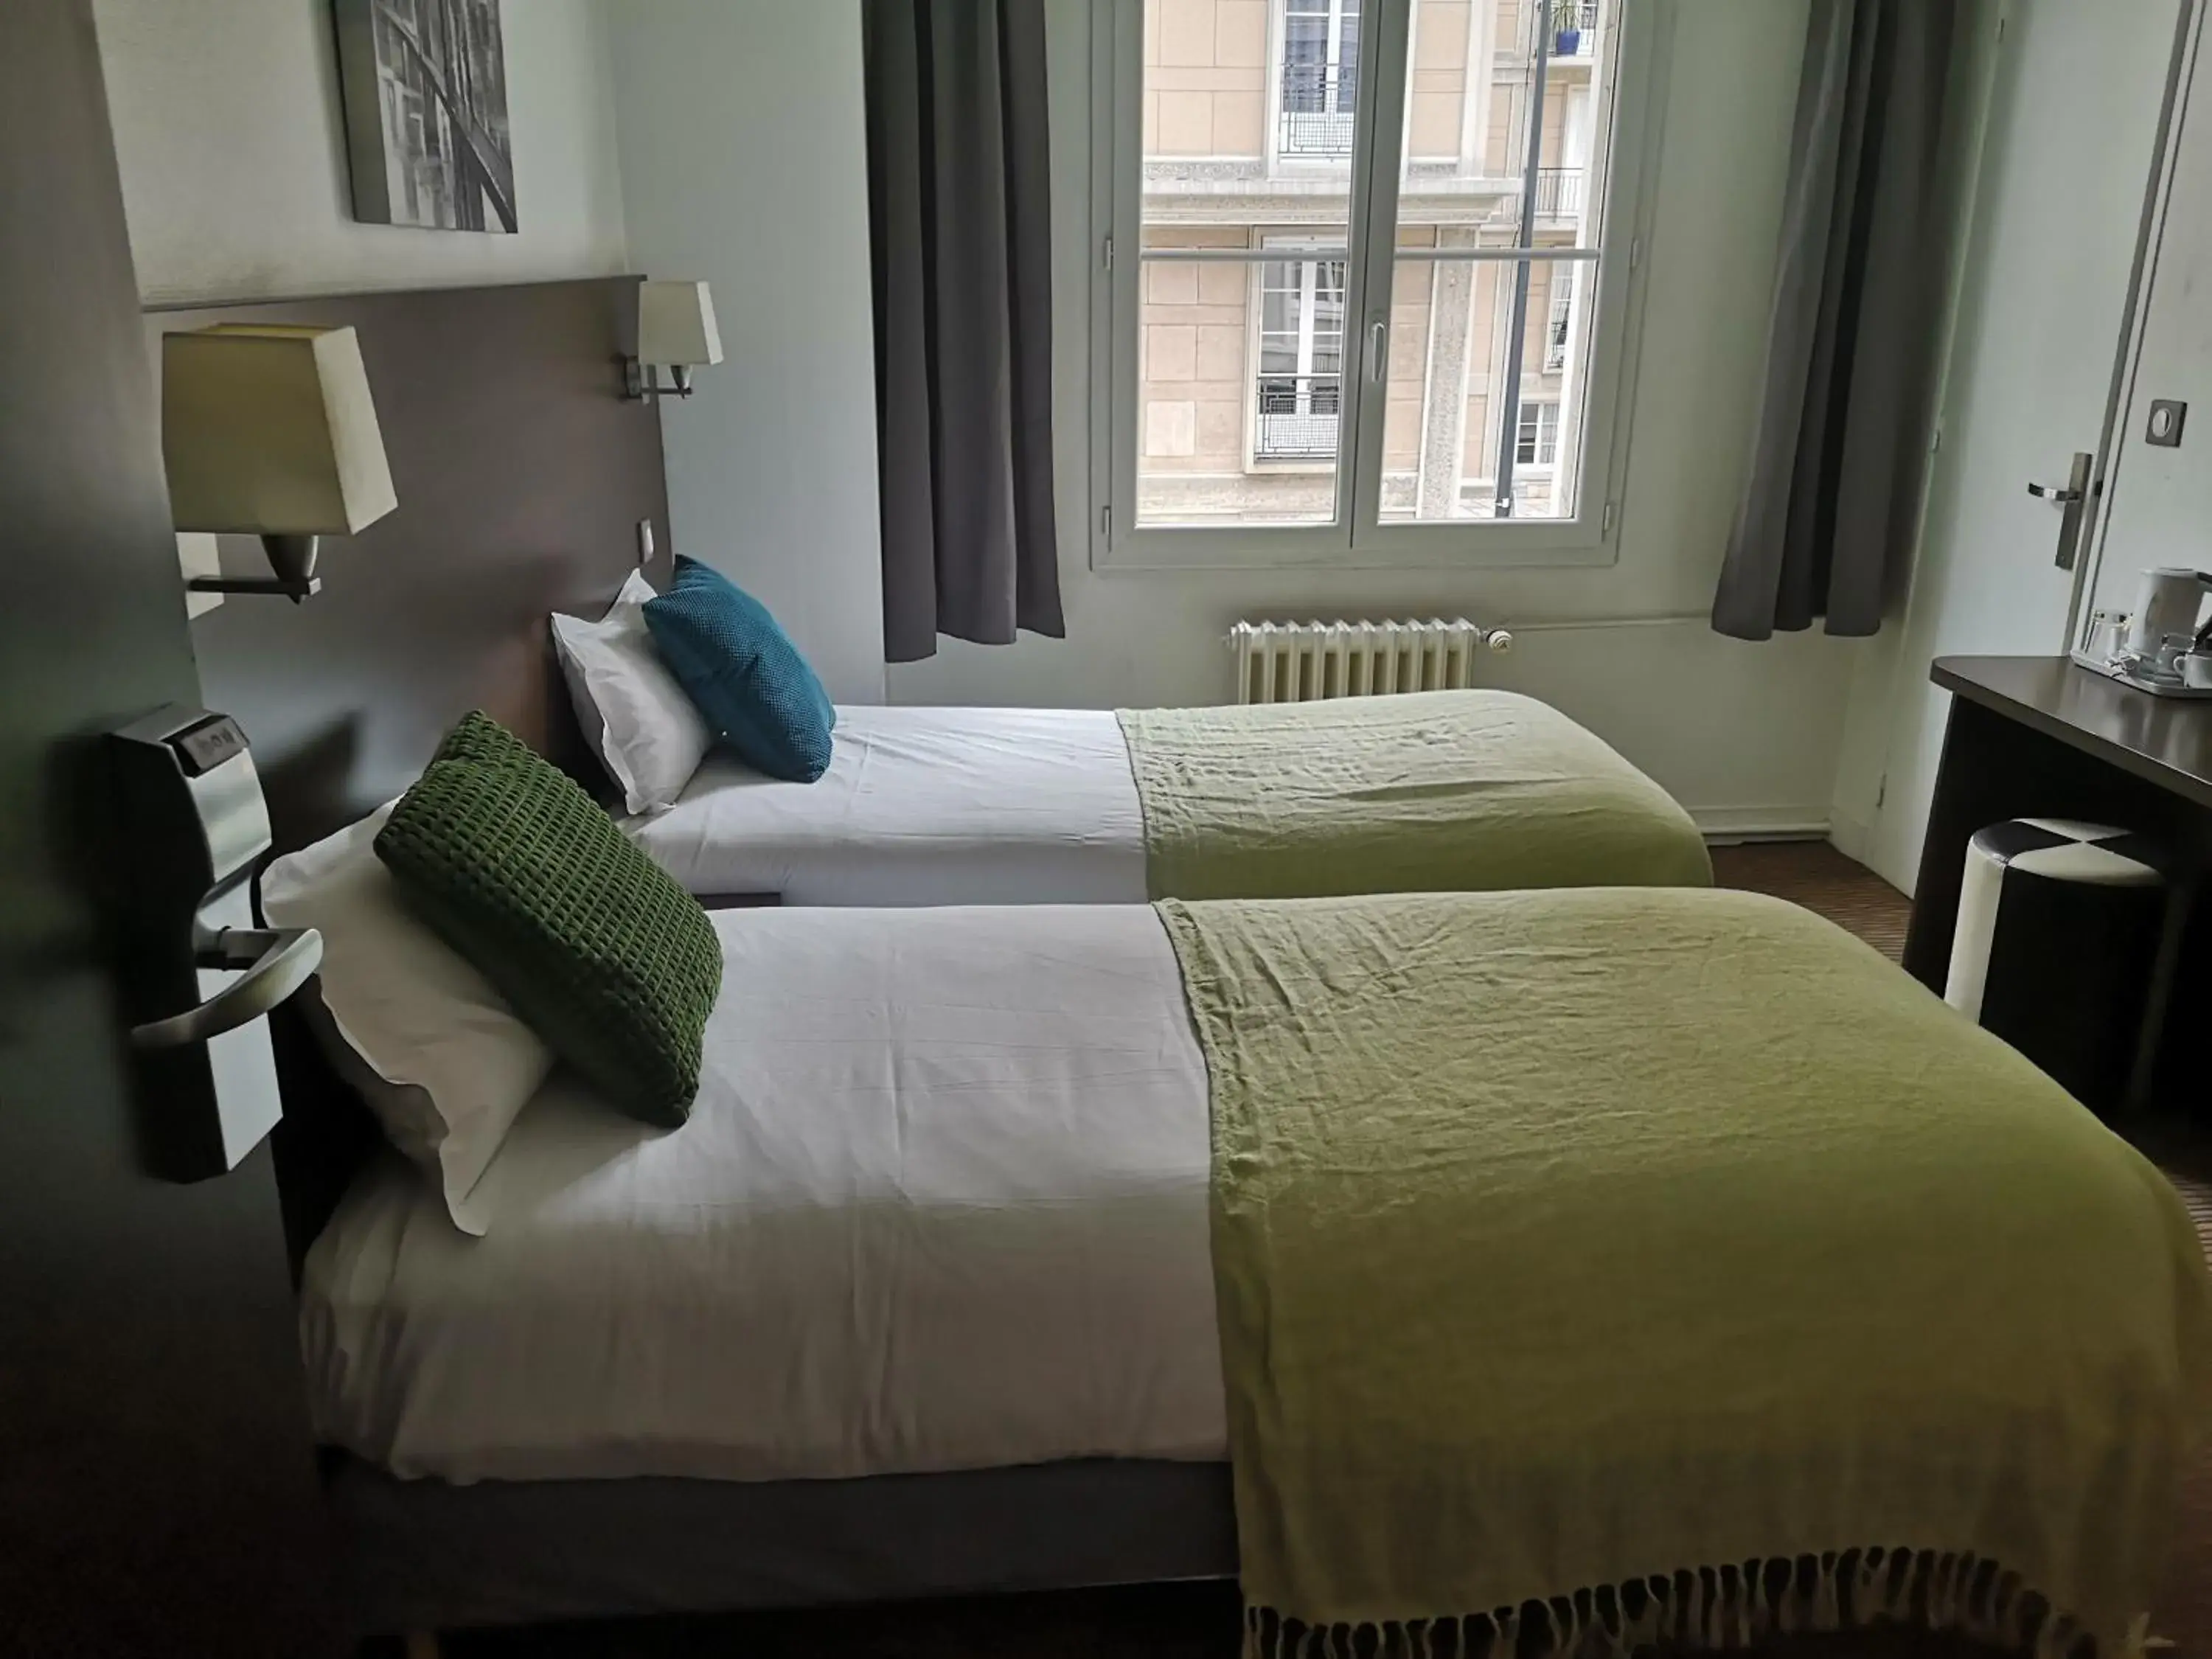 Property building, Bed in Urban Style- Hotel d'Angleterre Le Havre